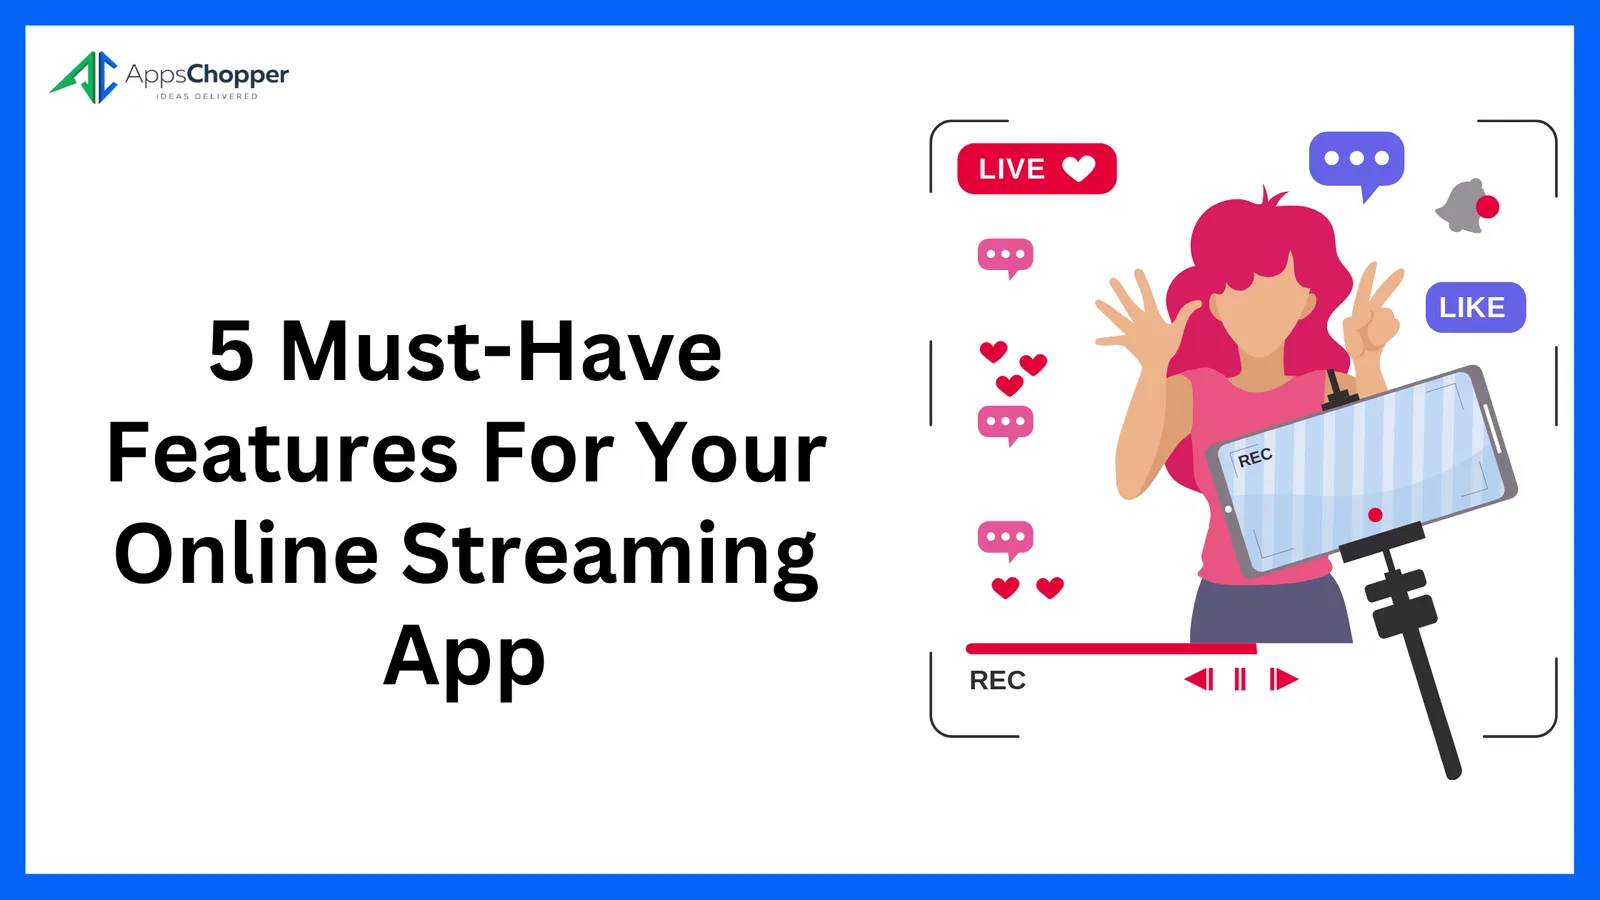 5 Must-Have Features For Your Online Streaming App